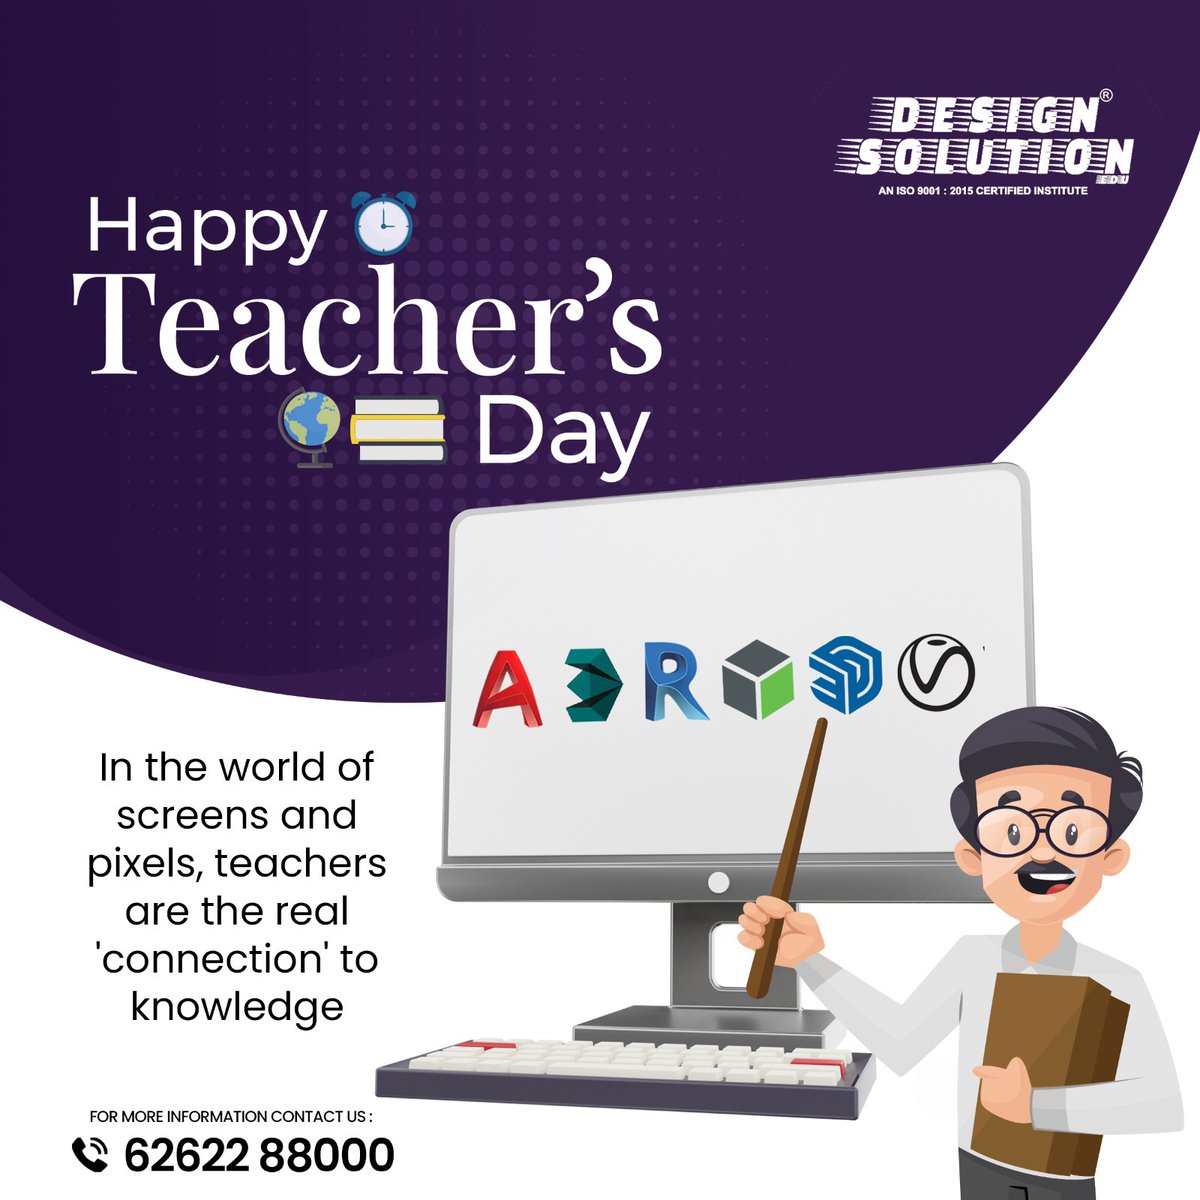 Teaching is one profession that creates all other professions. 𝐇𝐚𝐩𝐩𝐲 𝐓𝐞𝐚𝐜𝐡𝐞𝐫𝐬' 𝐃𝐚𝐲 to all the great teachers out there!👩‍🏫
#designsolution #autocad #virtualclass #software #onlineclass #autocadclass #cad #teachersday #teachersday2023 #DrSarvepalliRadhakrishnan